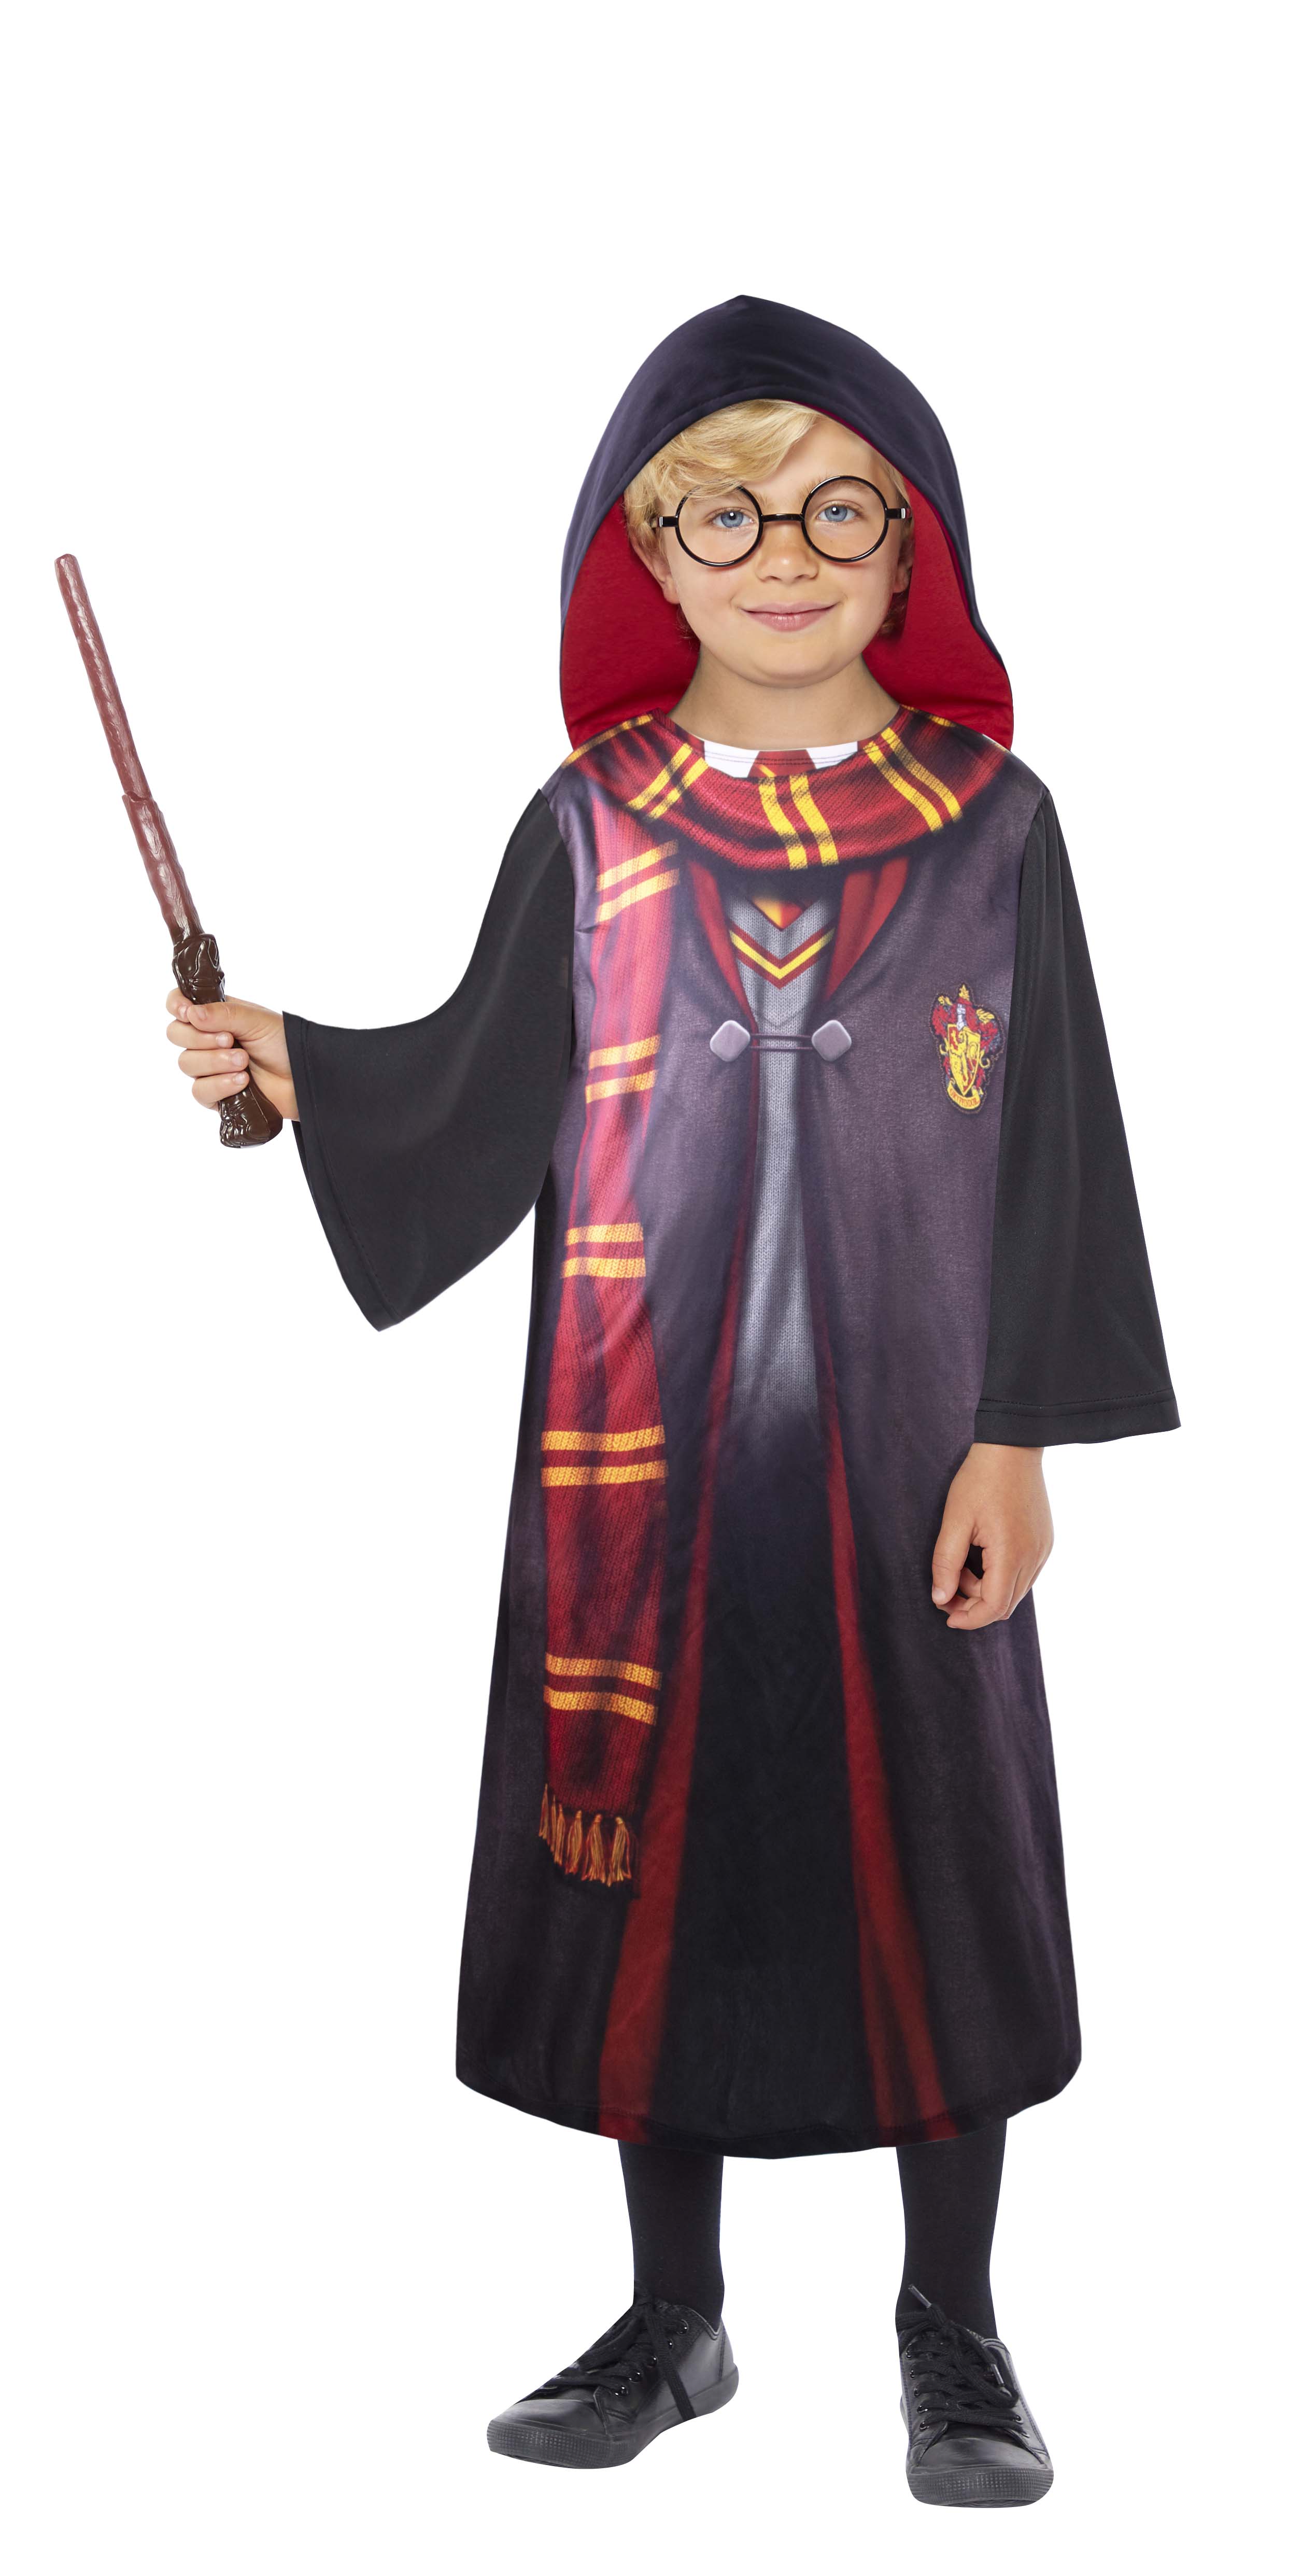 CO:Harry Potter Robe,Glasses & Wand 8-10